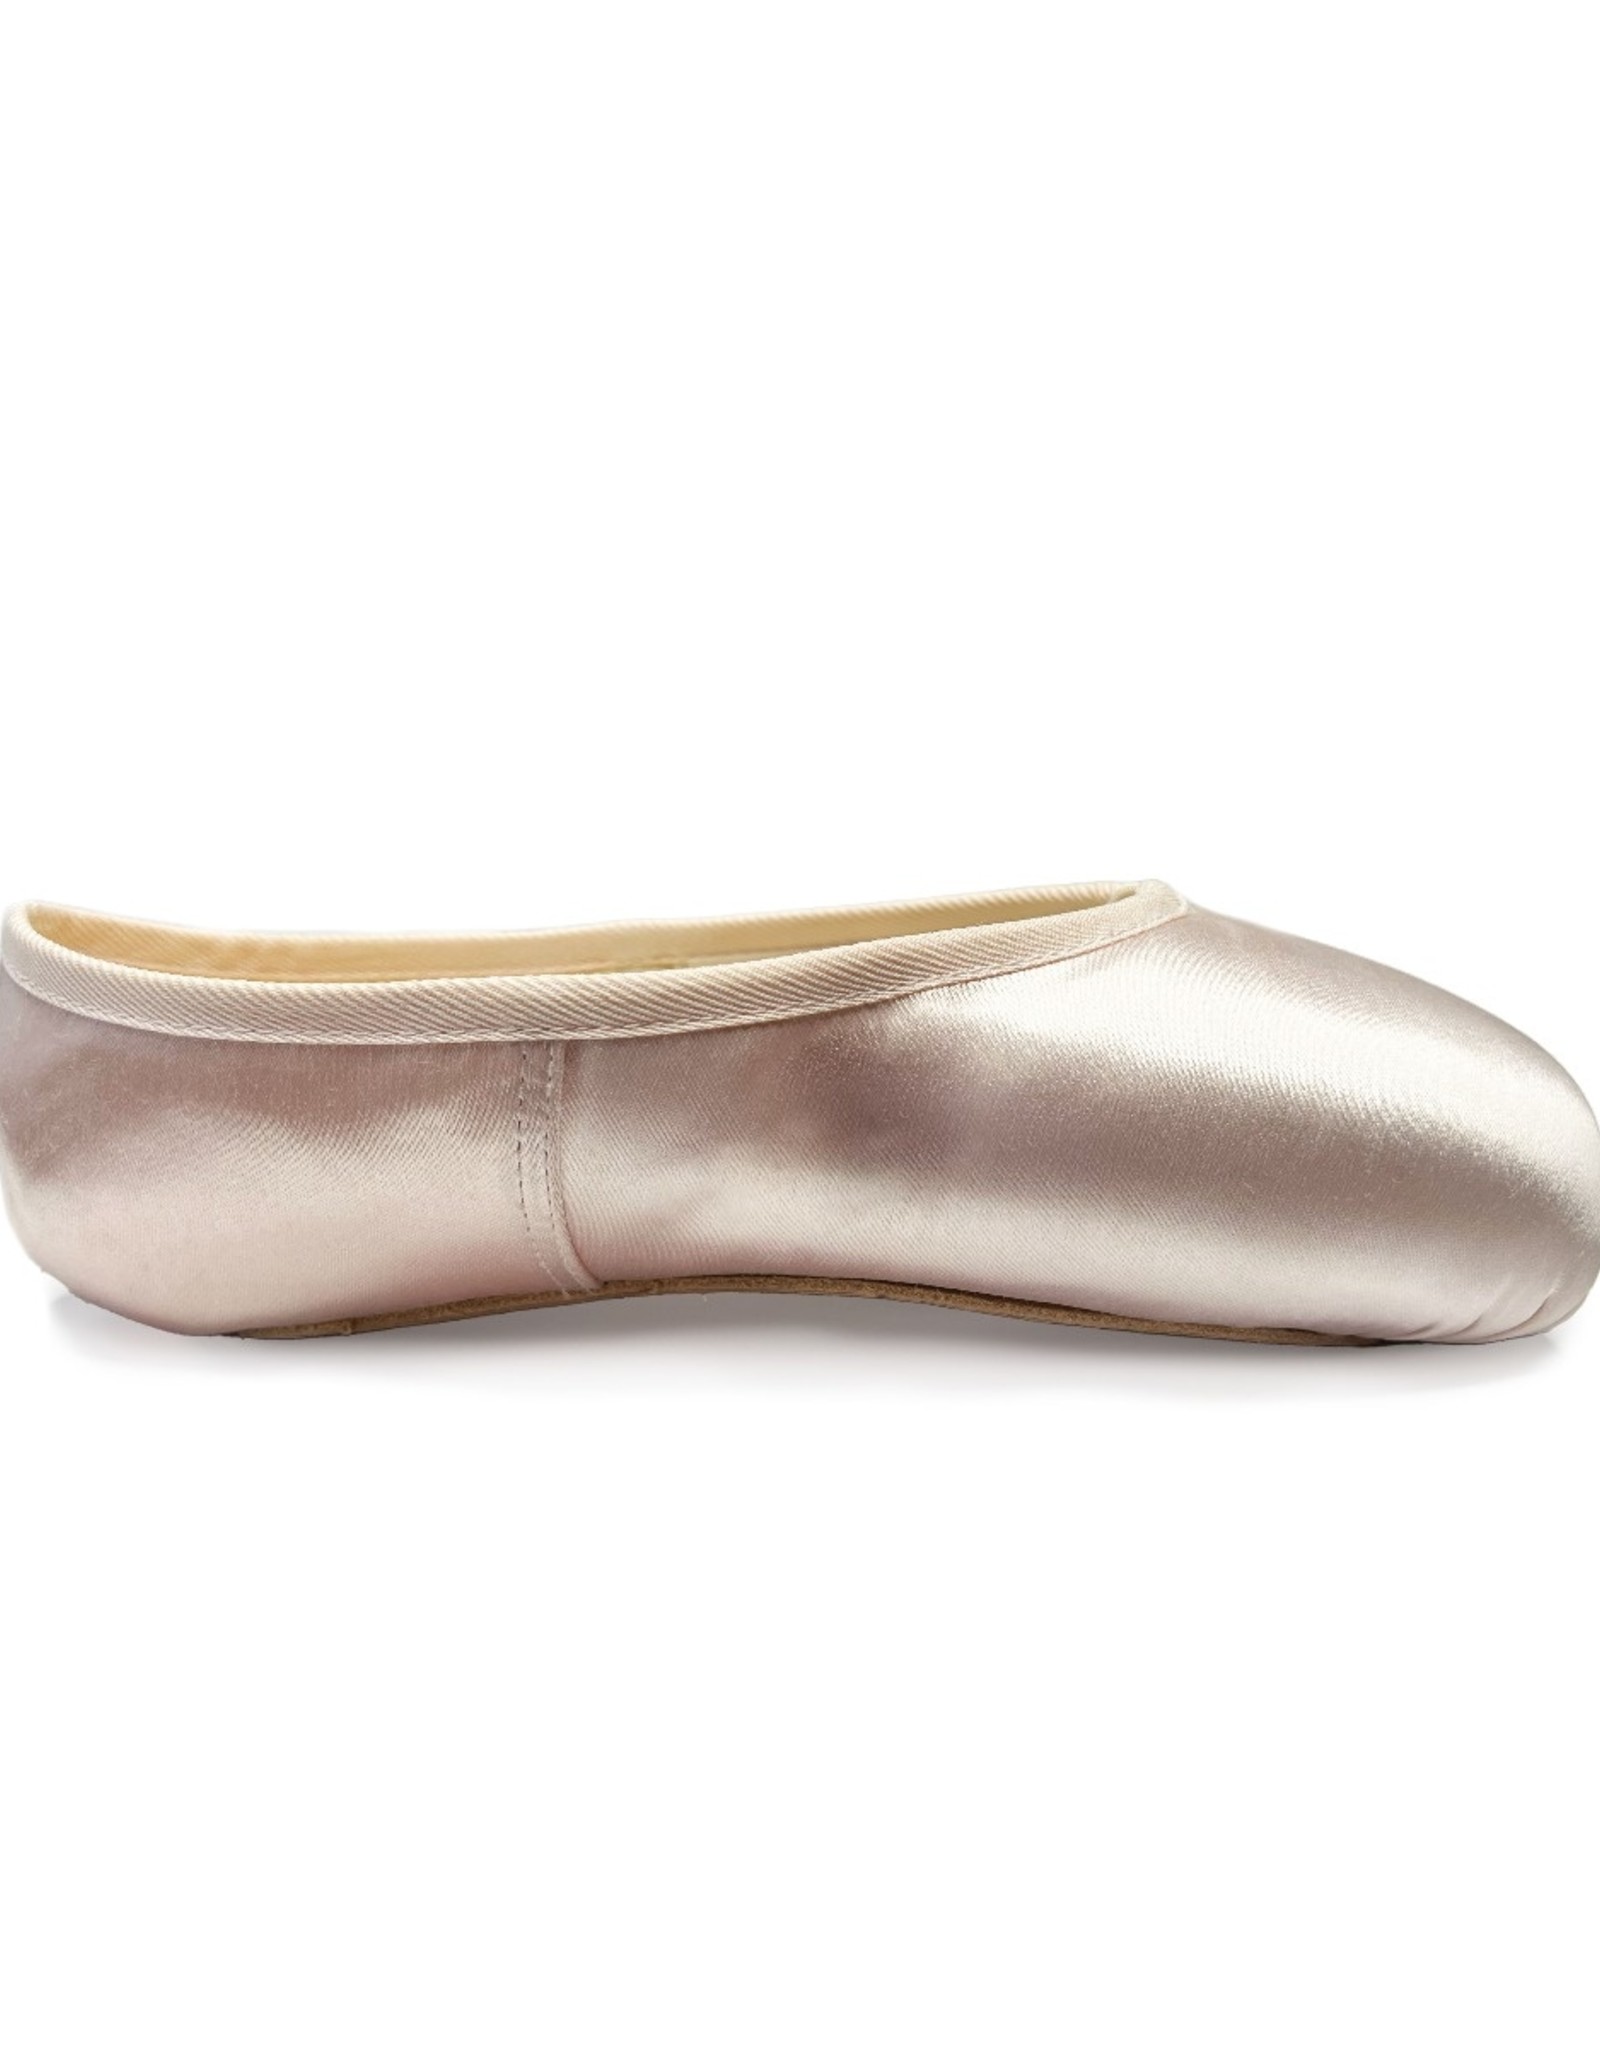 RP Collection Mabe Pointe Shoes